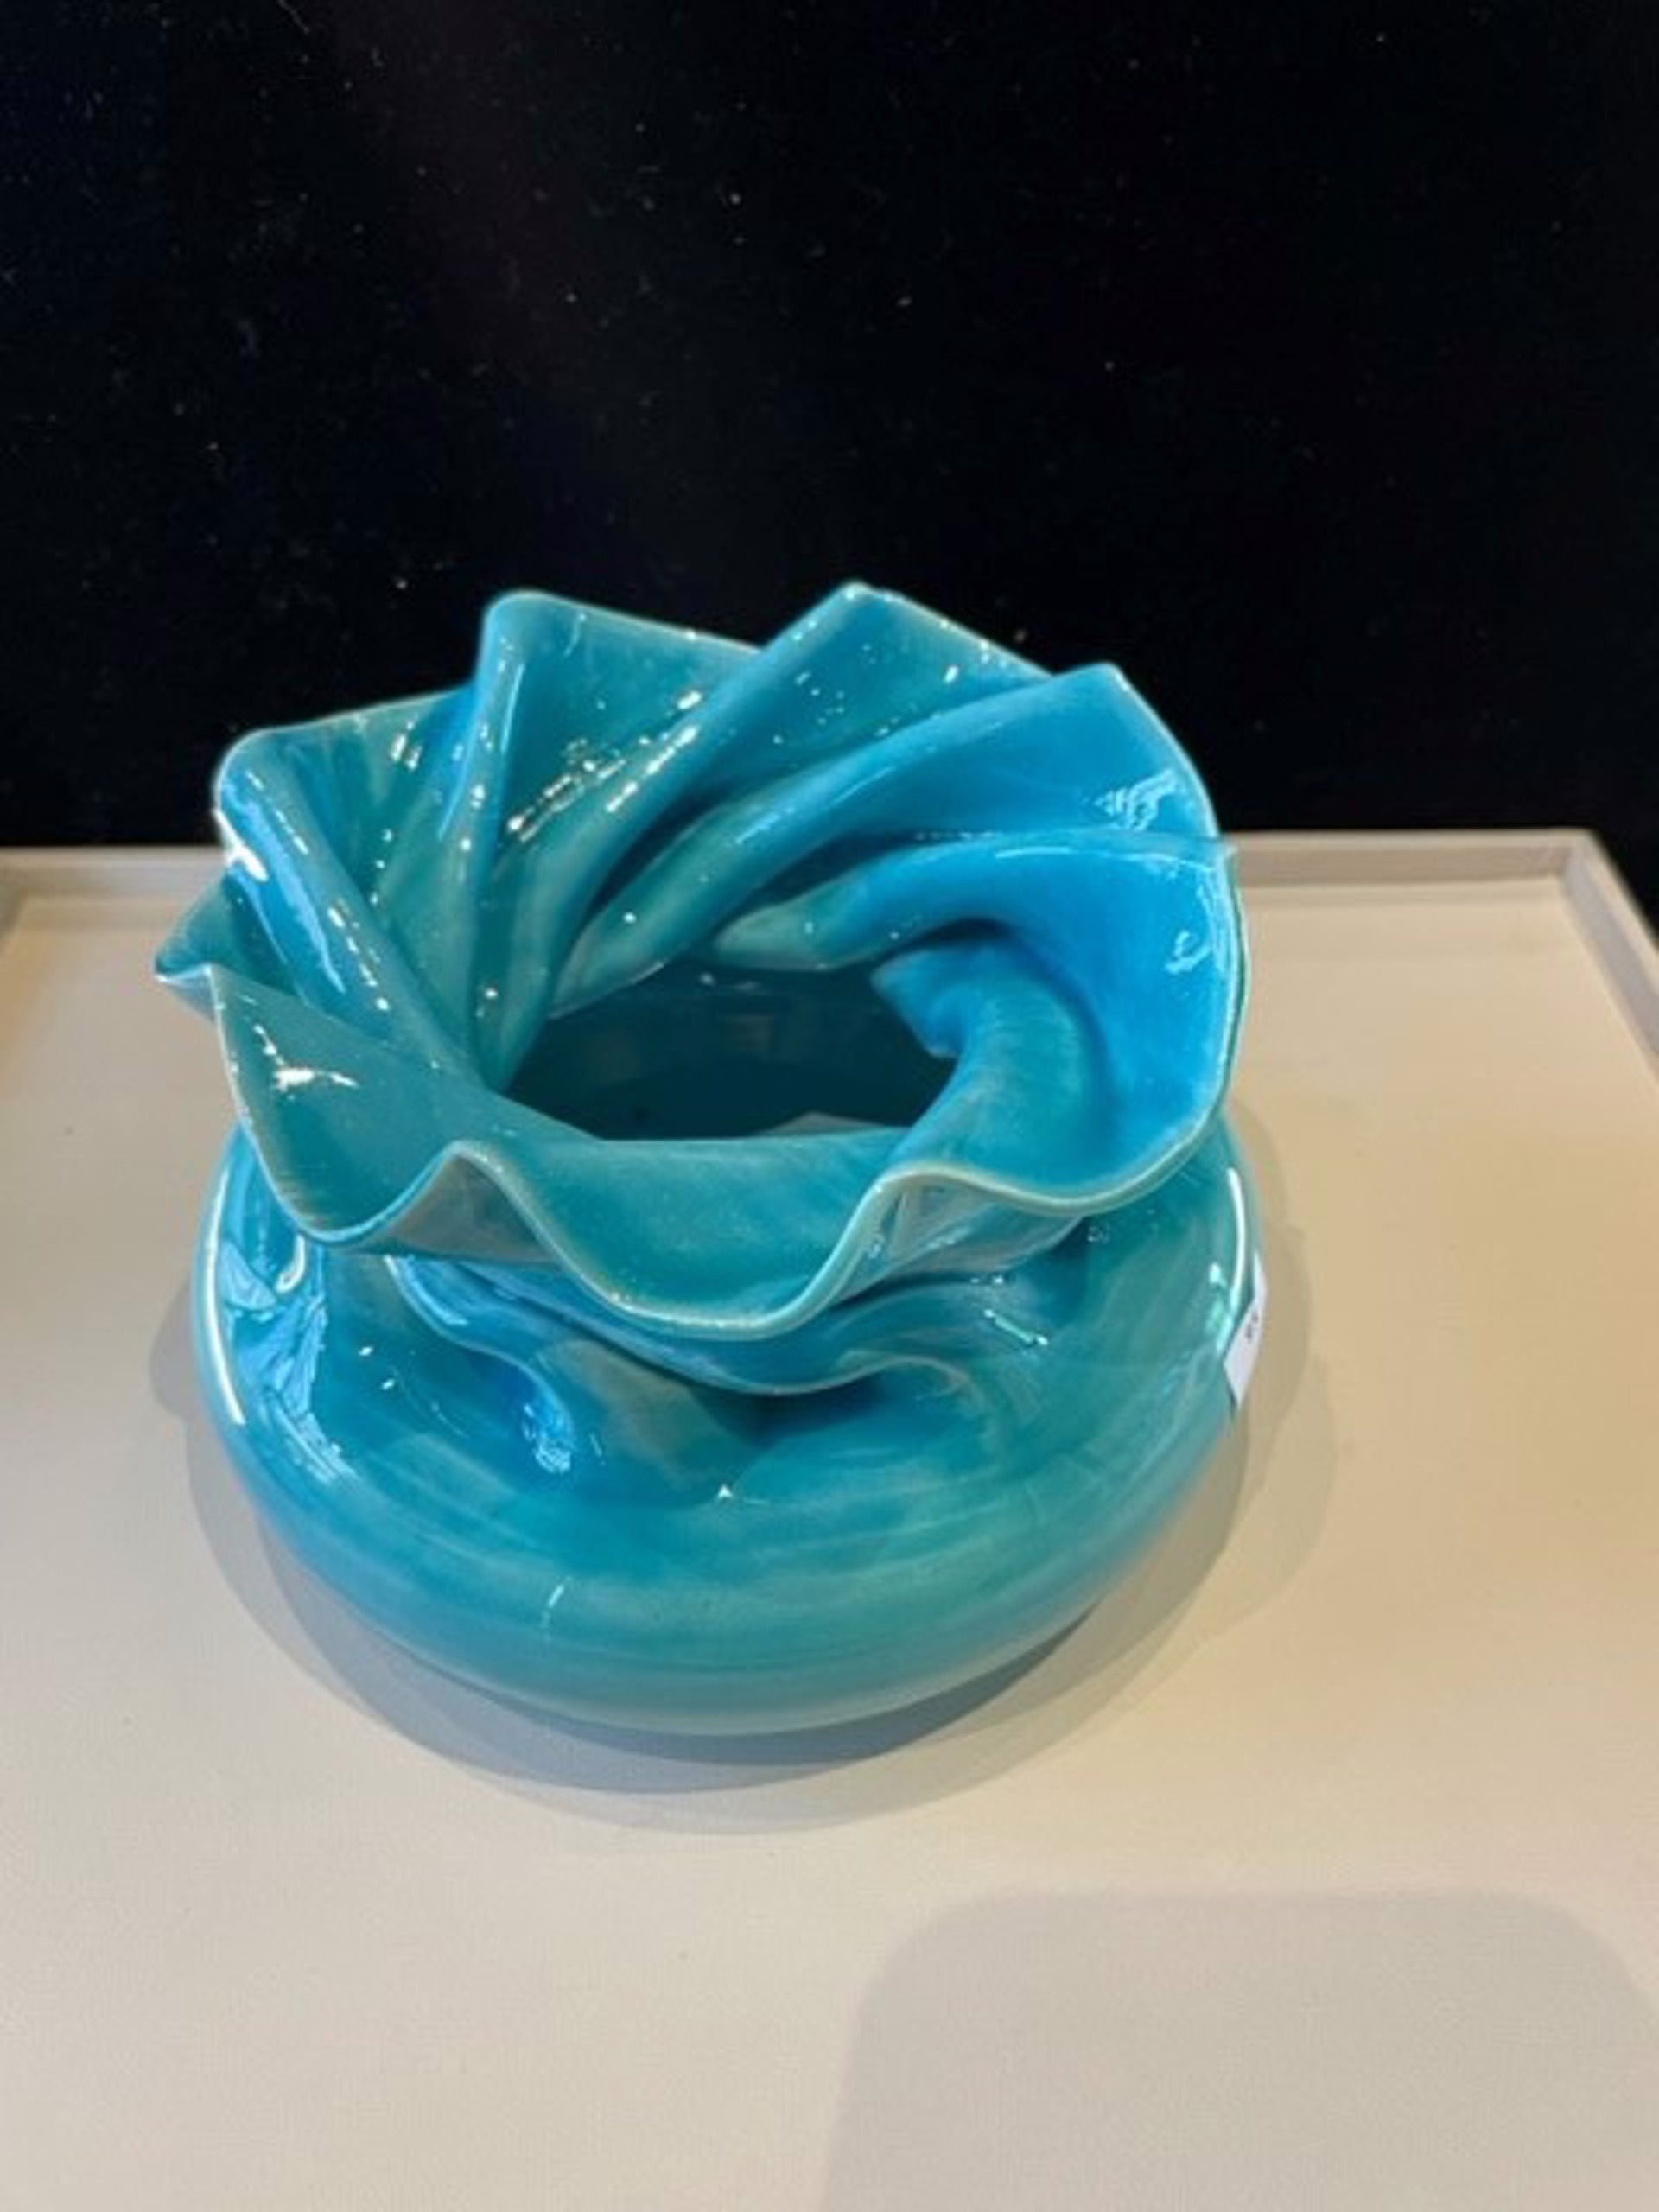 Clarkhouse #95 Turquoise full ruffle top vase by Bill & Pam Clark Clark House Pottery